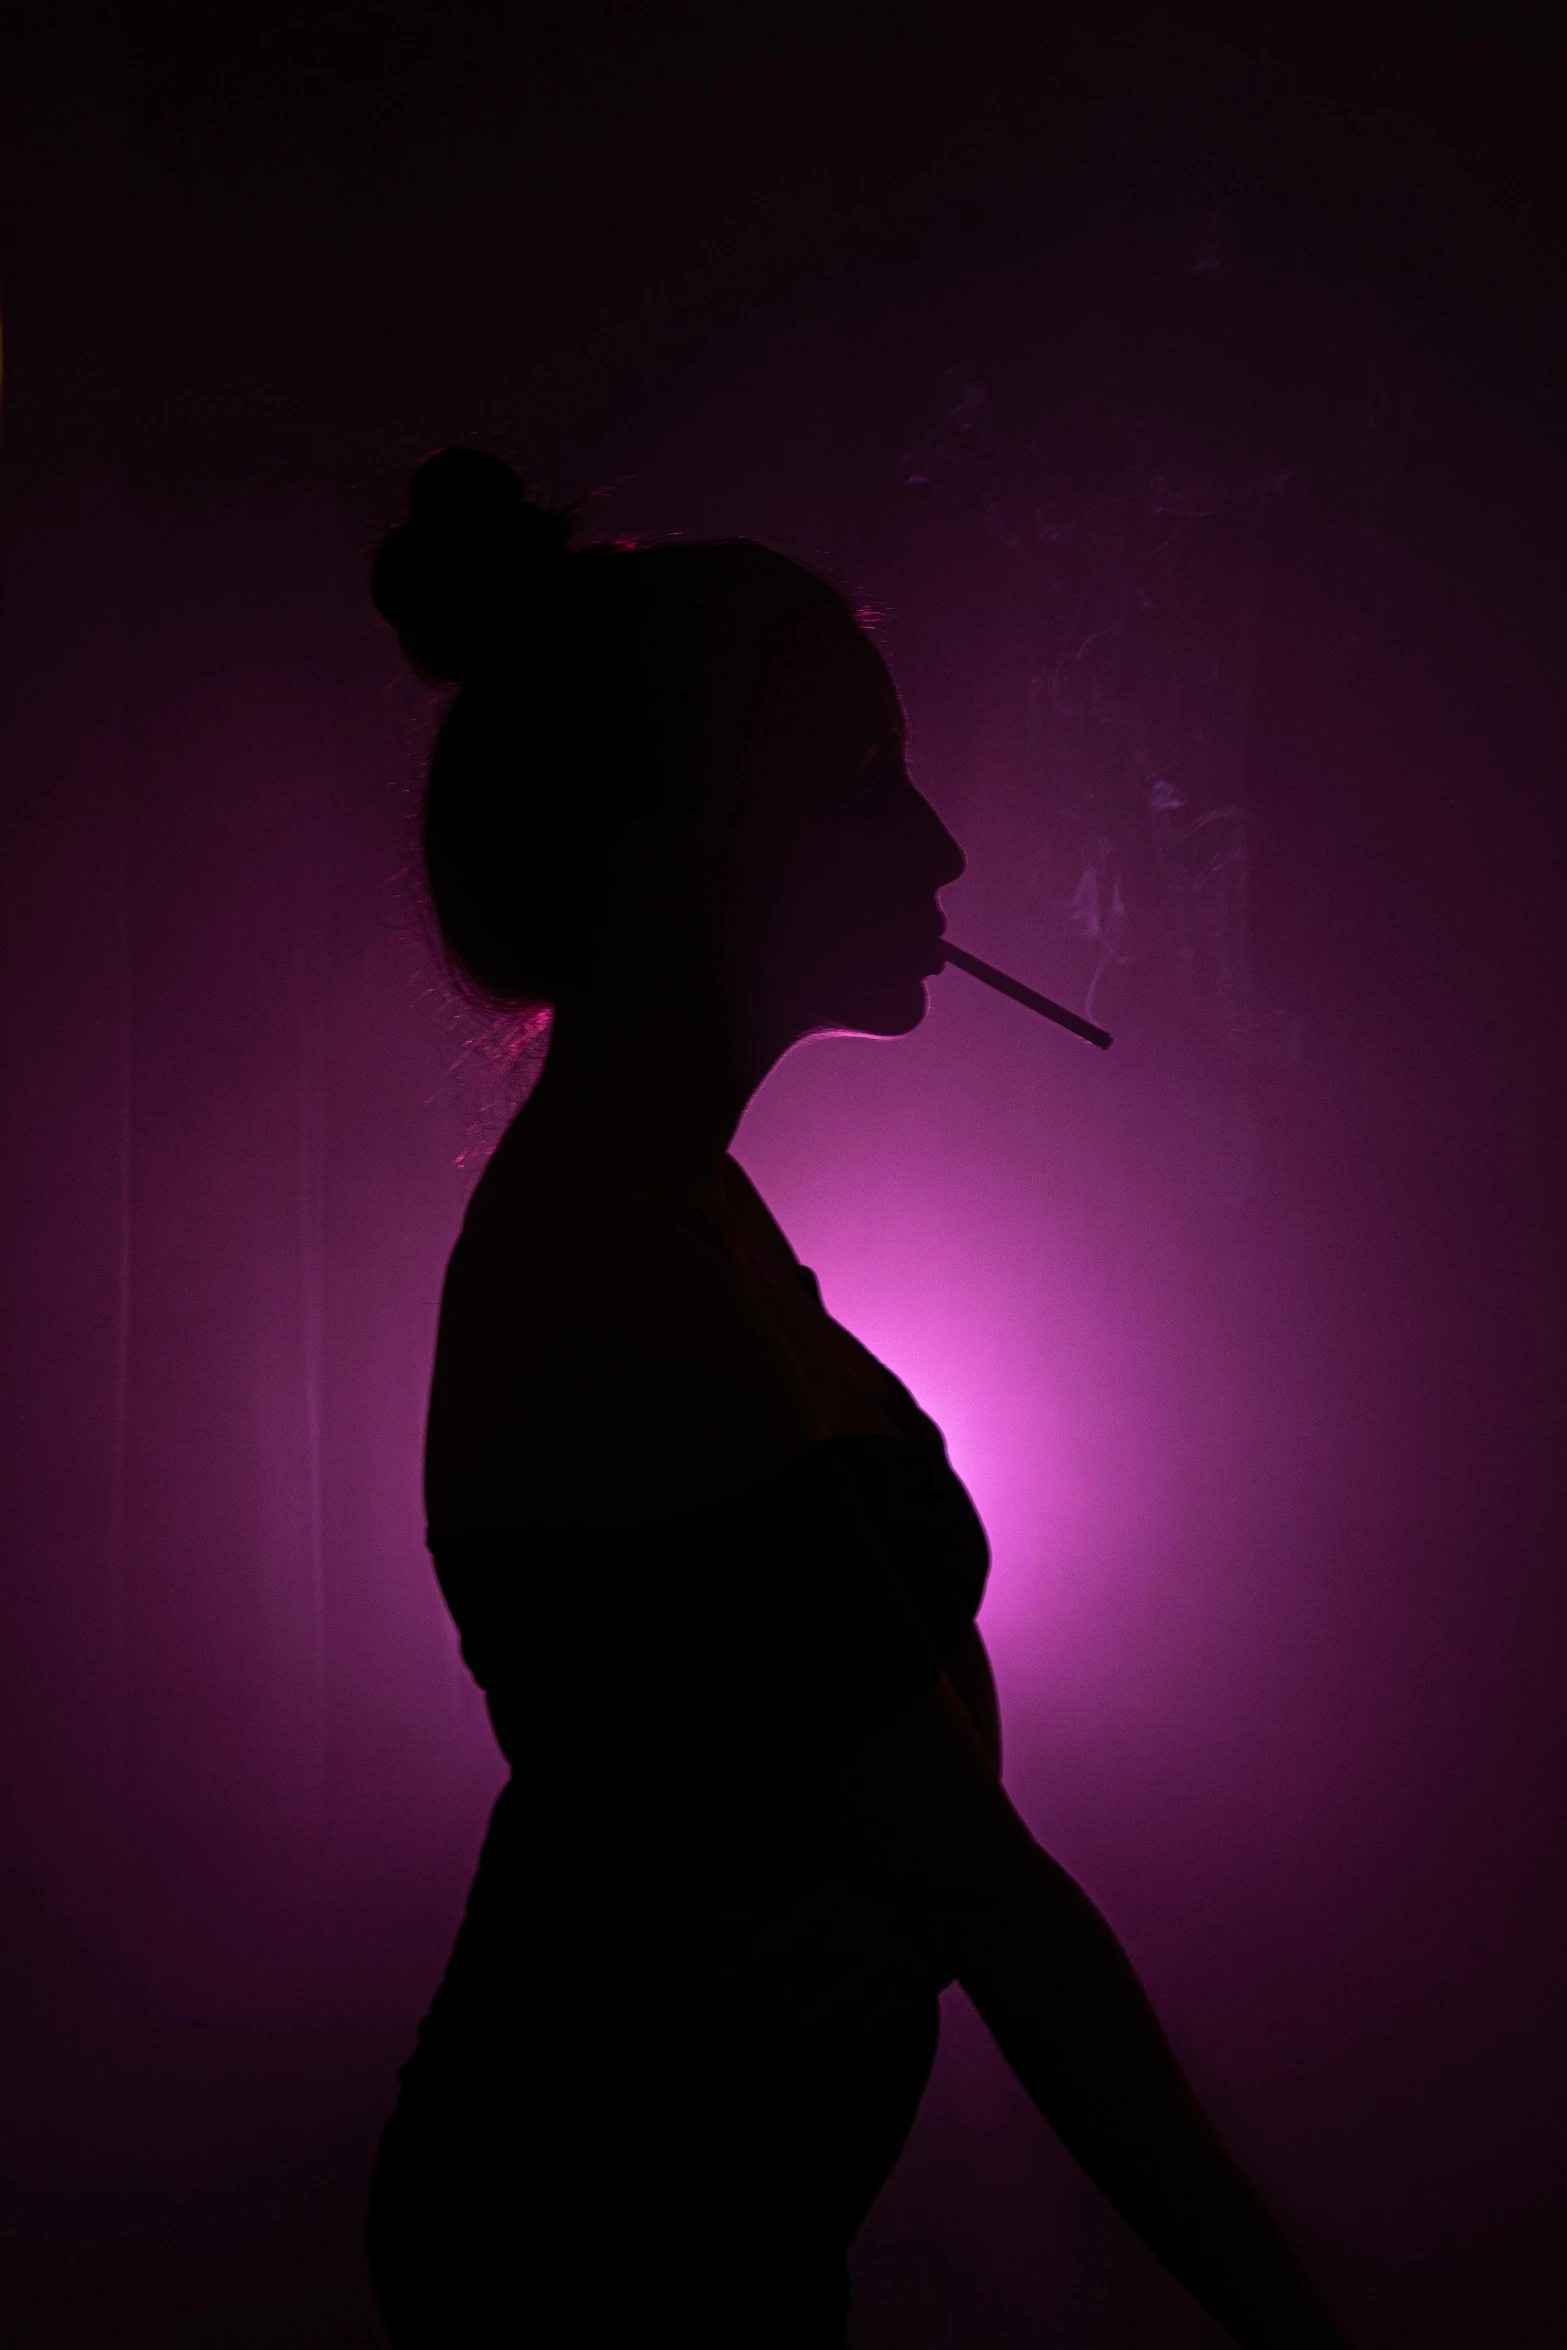 a woman smoking a cigarette in silhouette against a dark background